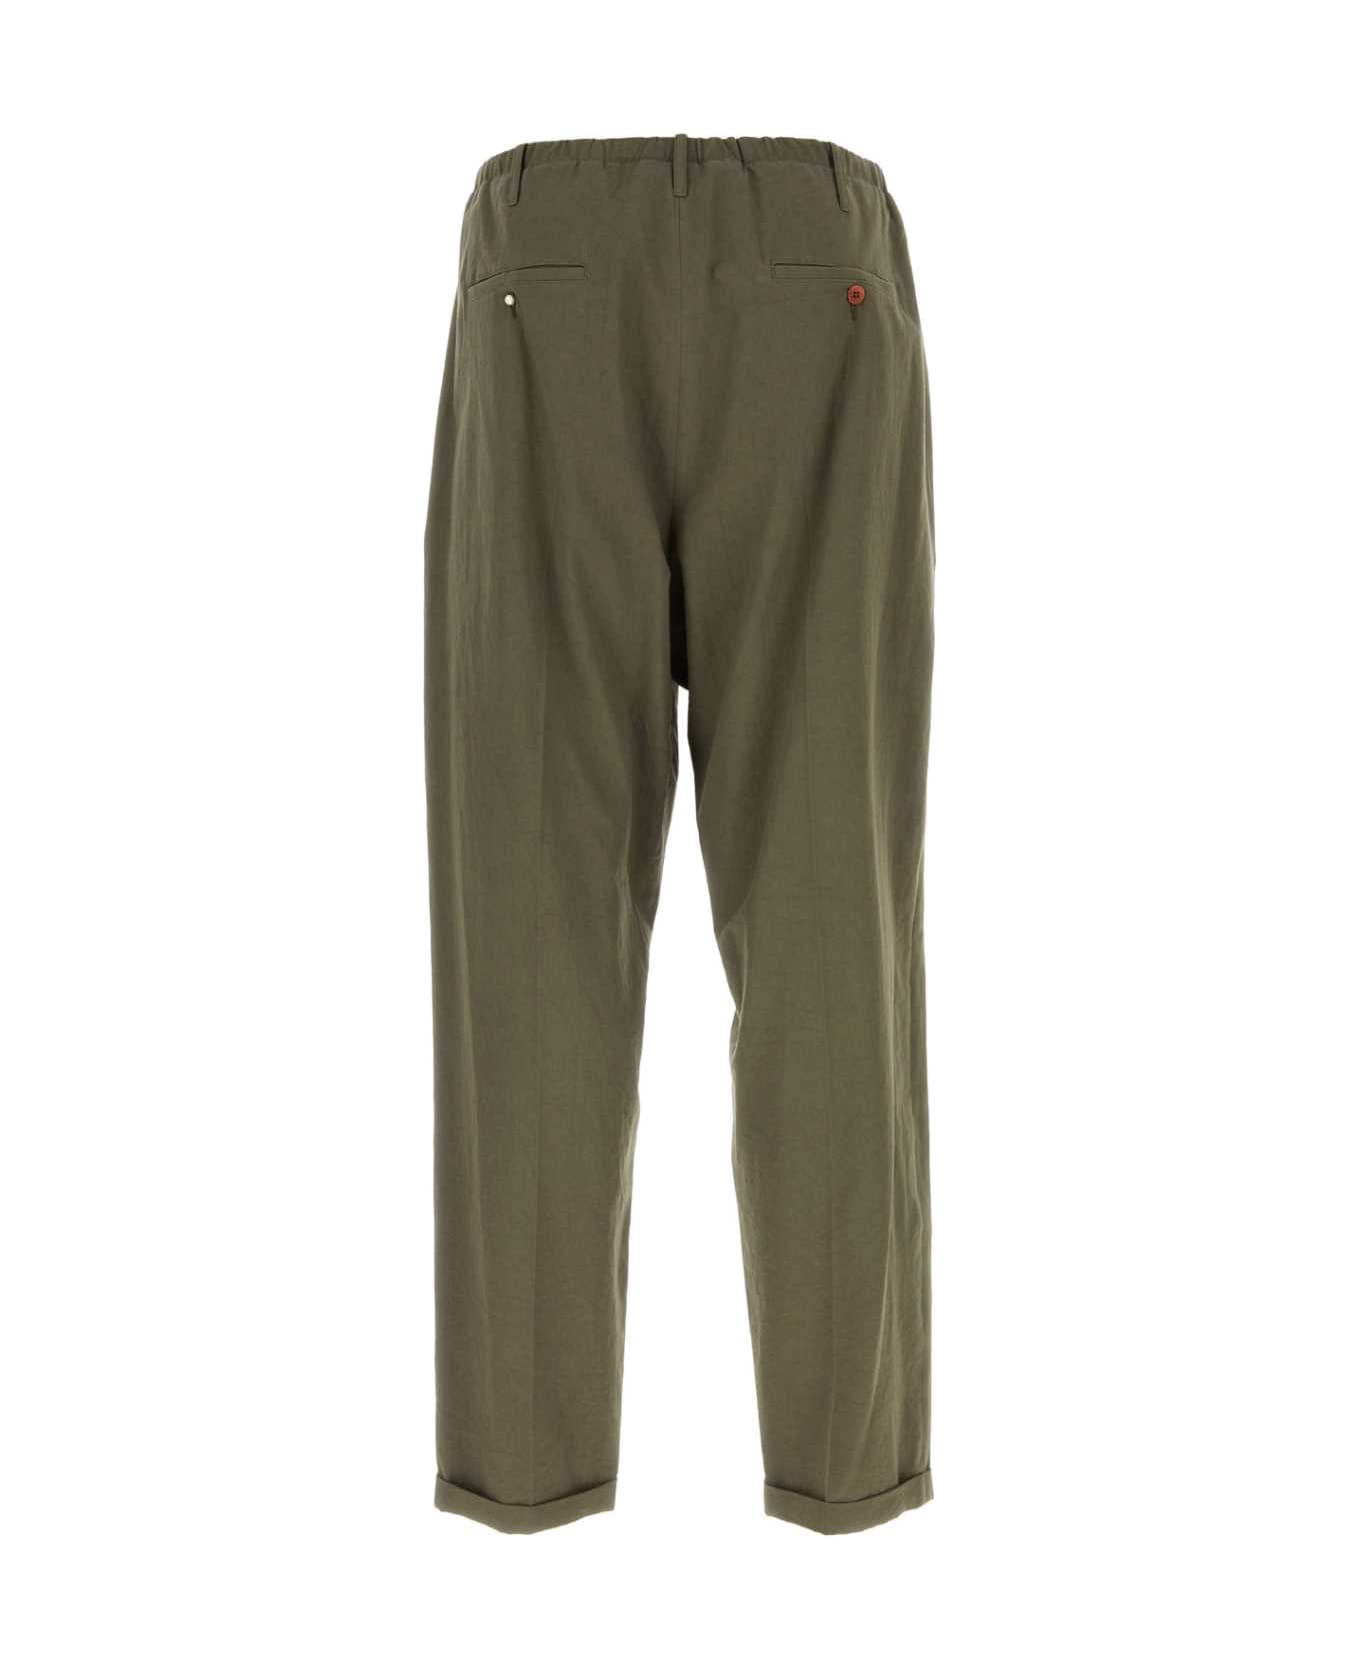 Magliano Army Green Cotton Pant - 03